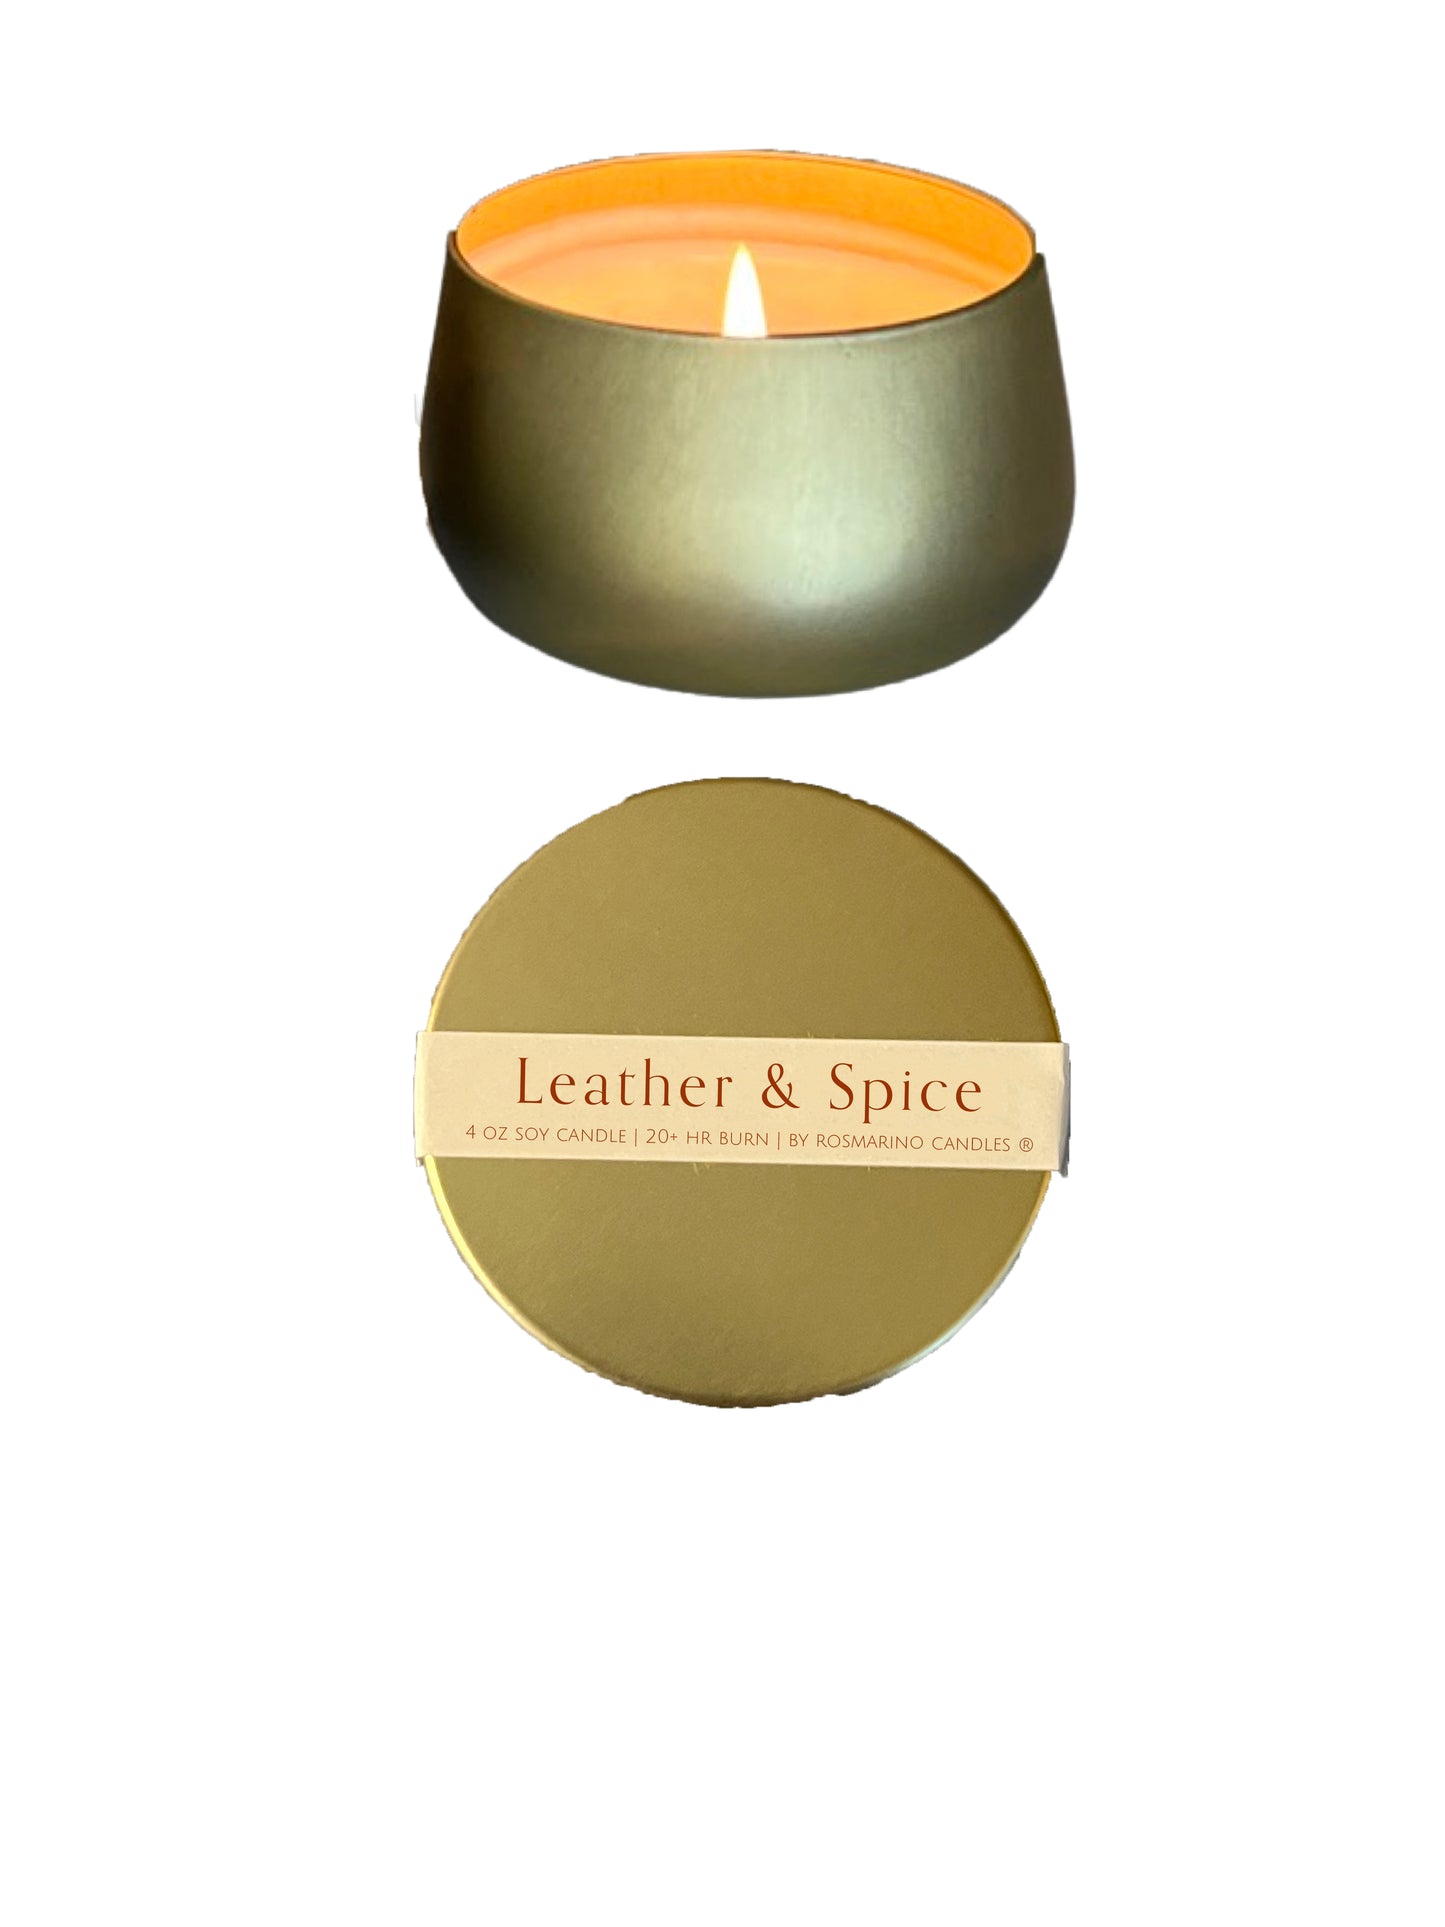 Leather & Spice (Ships in October Box)